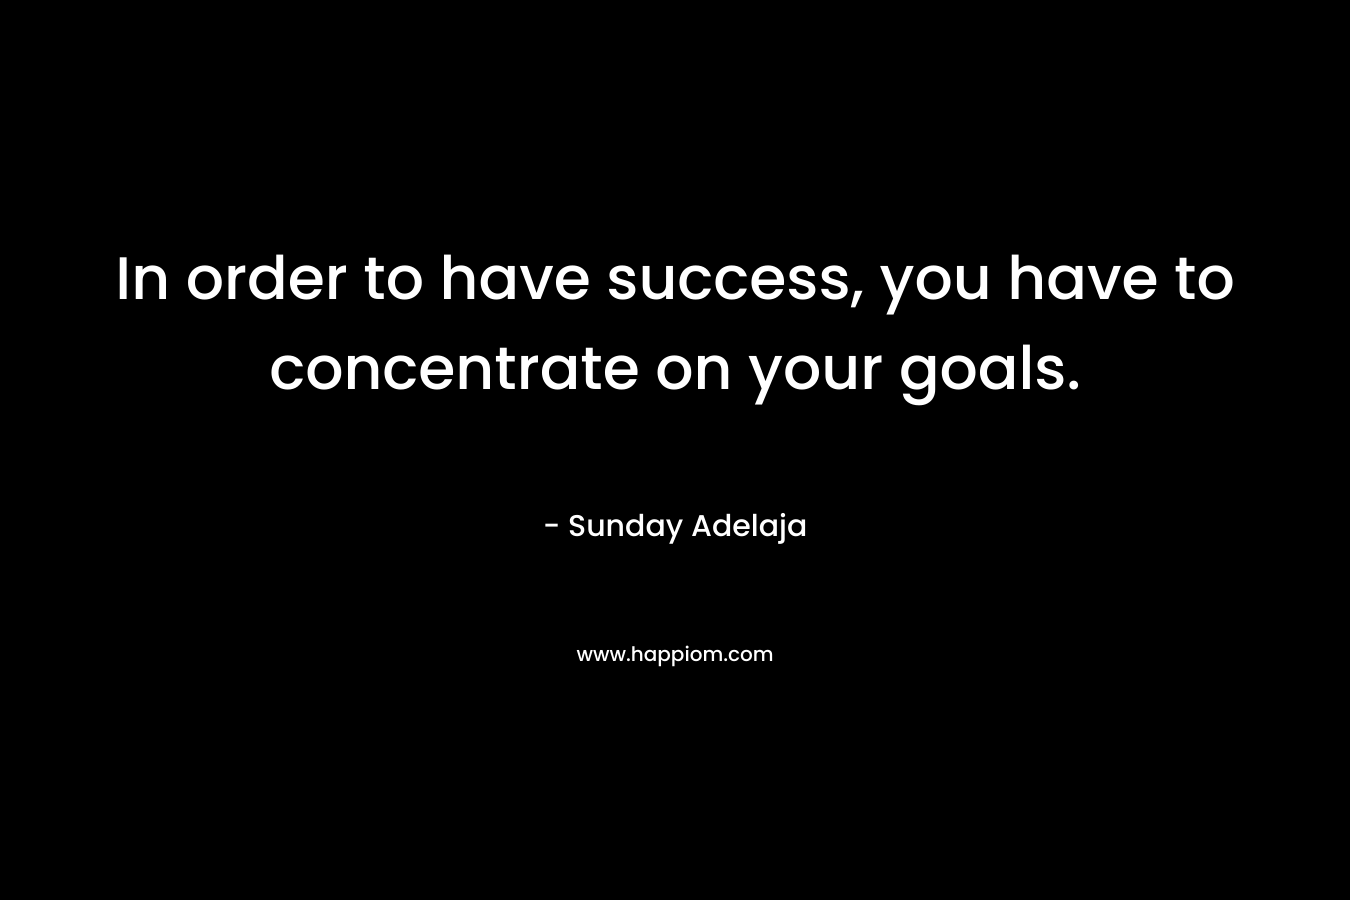 In order to have success, you have to concentrate on your goals.